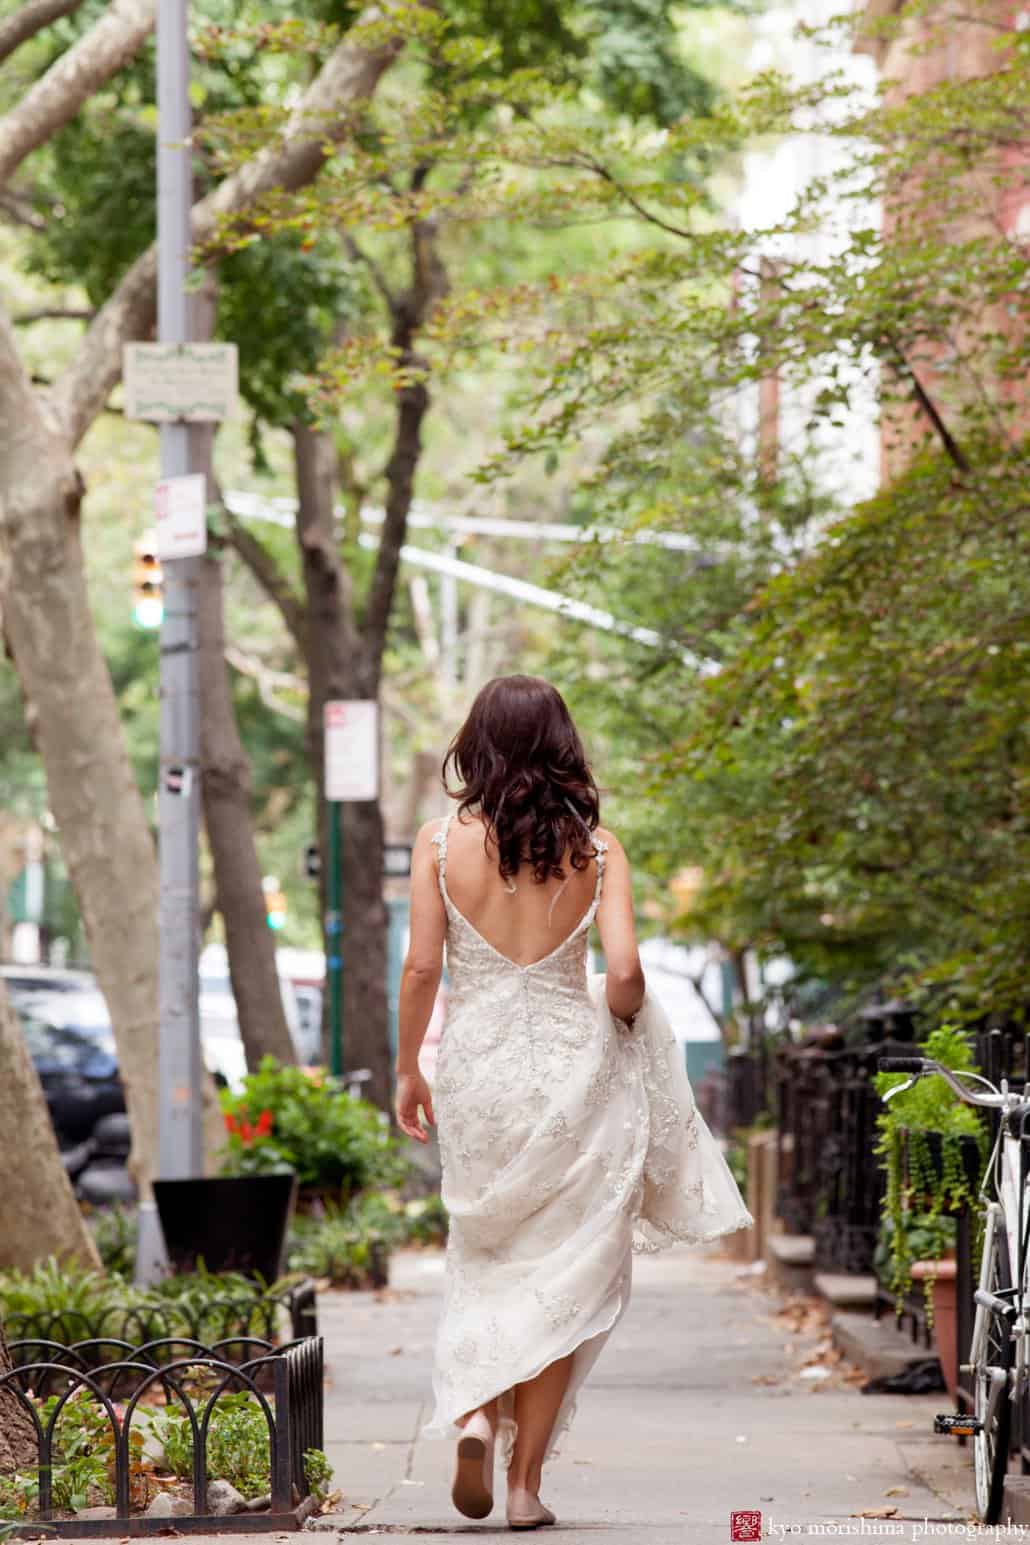 Bride wearing Maggie Sottero wedding dress walks down city street in Cobble Hill getting ready, photographed by Kyo Morishima